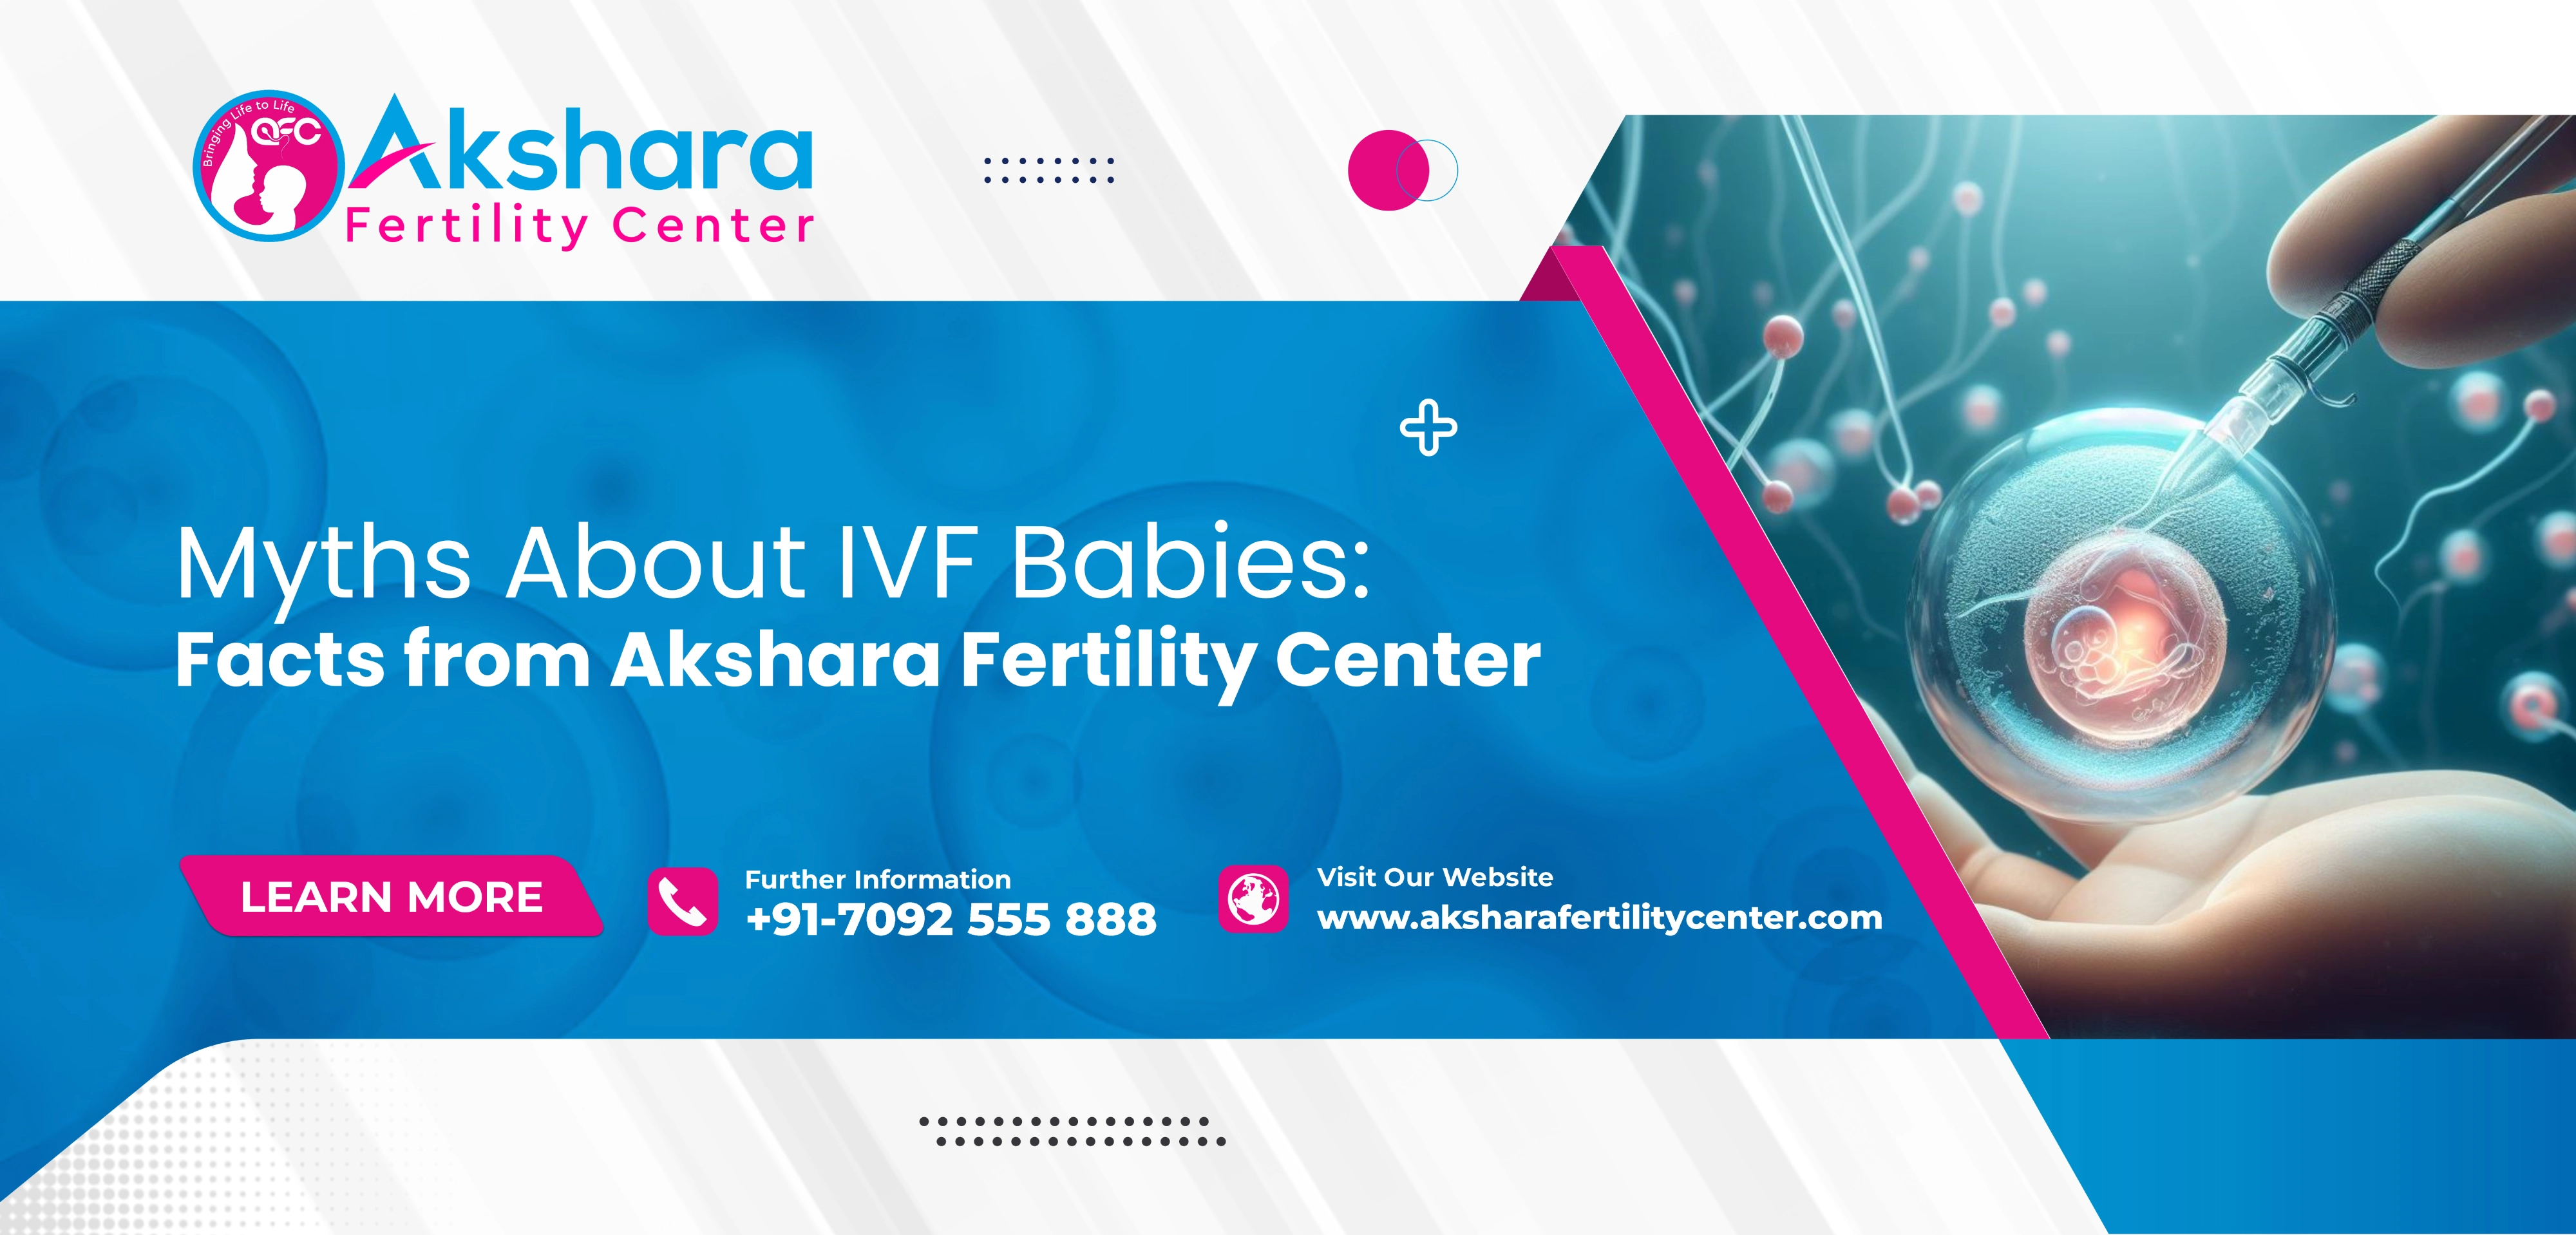 Myths About IVF Babies: Facts from Akshara Fertility Center